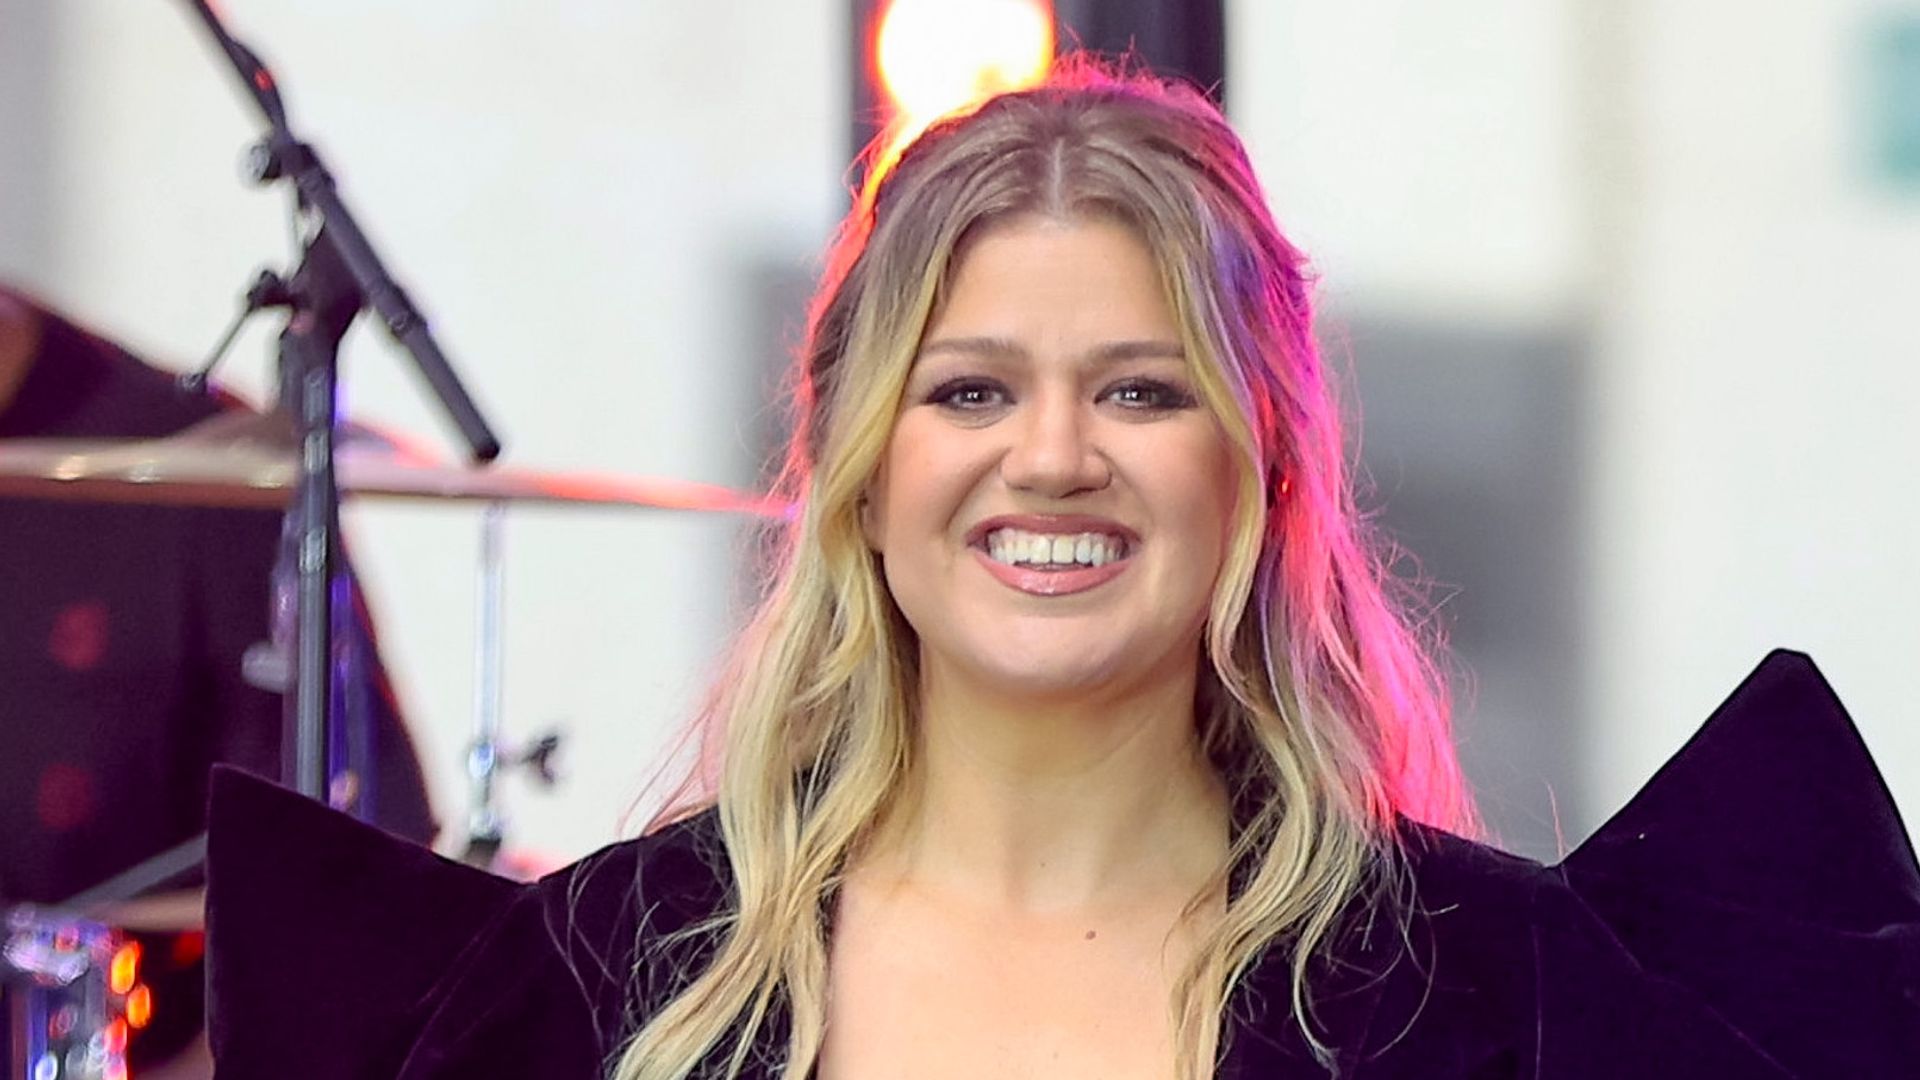 Kelly Clarkson is seen performing at the Citi Concert Series for the 'Today' Show on September 22, 2023 in New York City.